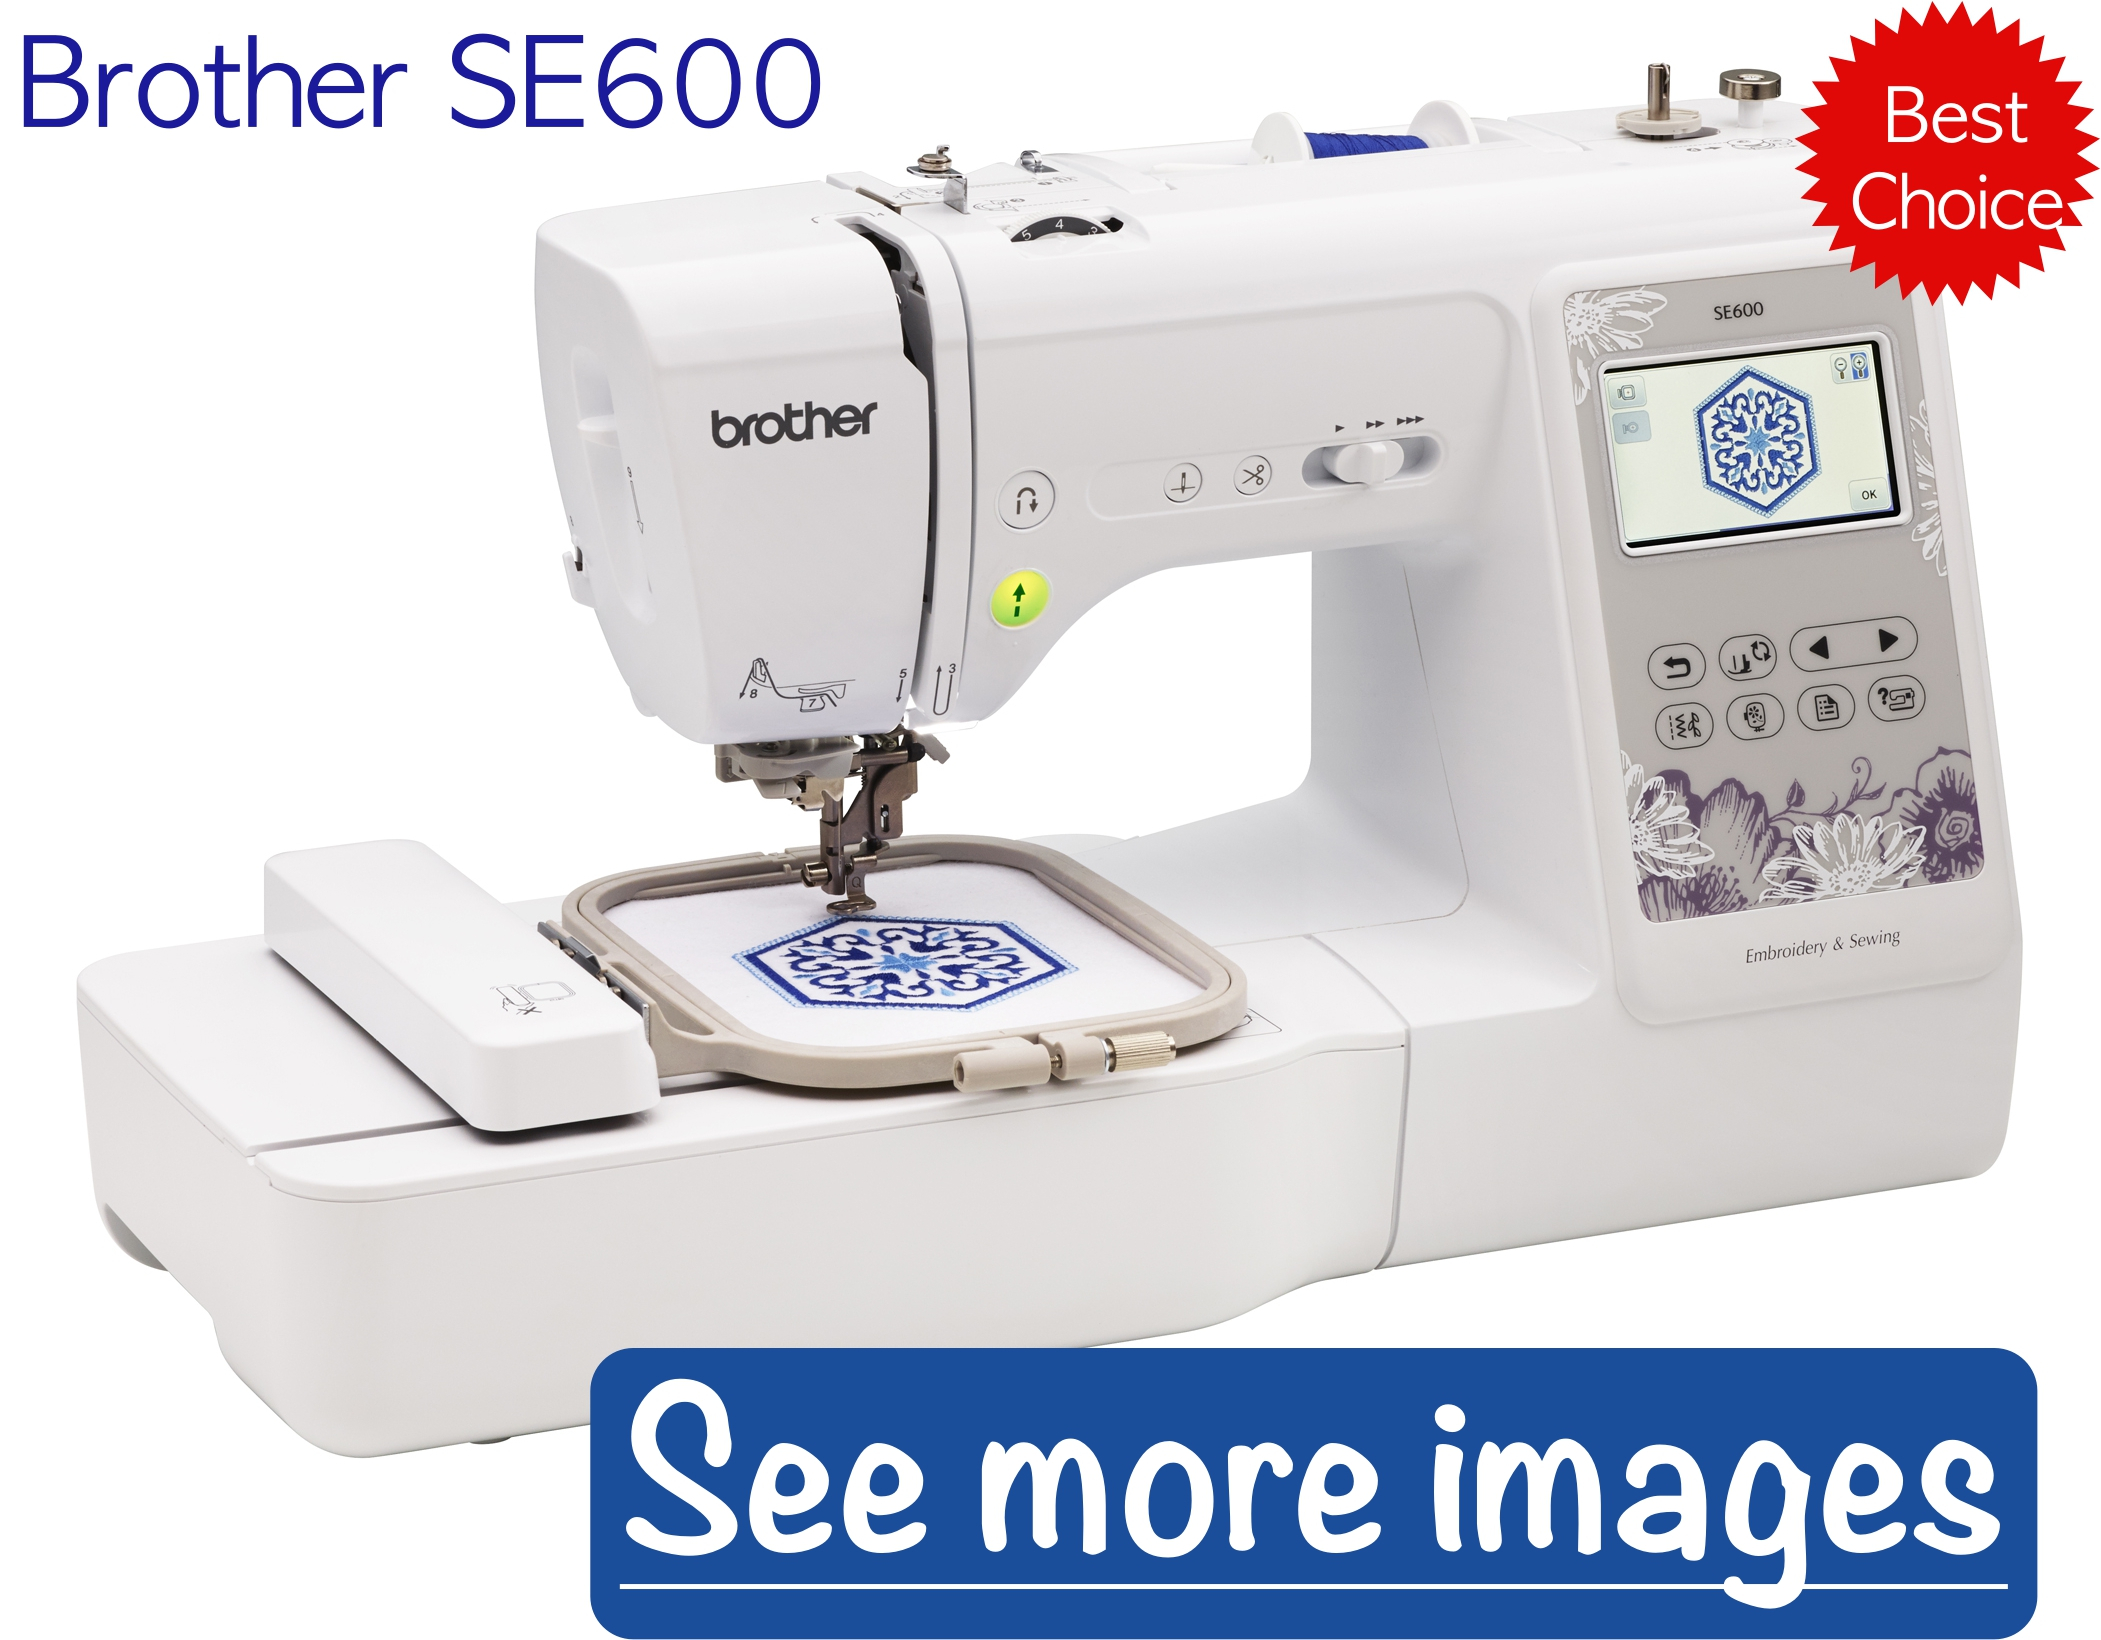 Brother Sewing Machine Embroidery Patterns Brother Se600 Review Specs Features Pros Cons Best Sewing